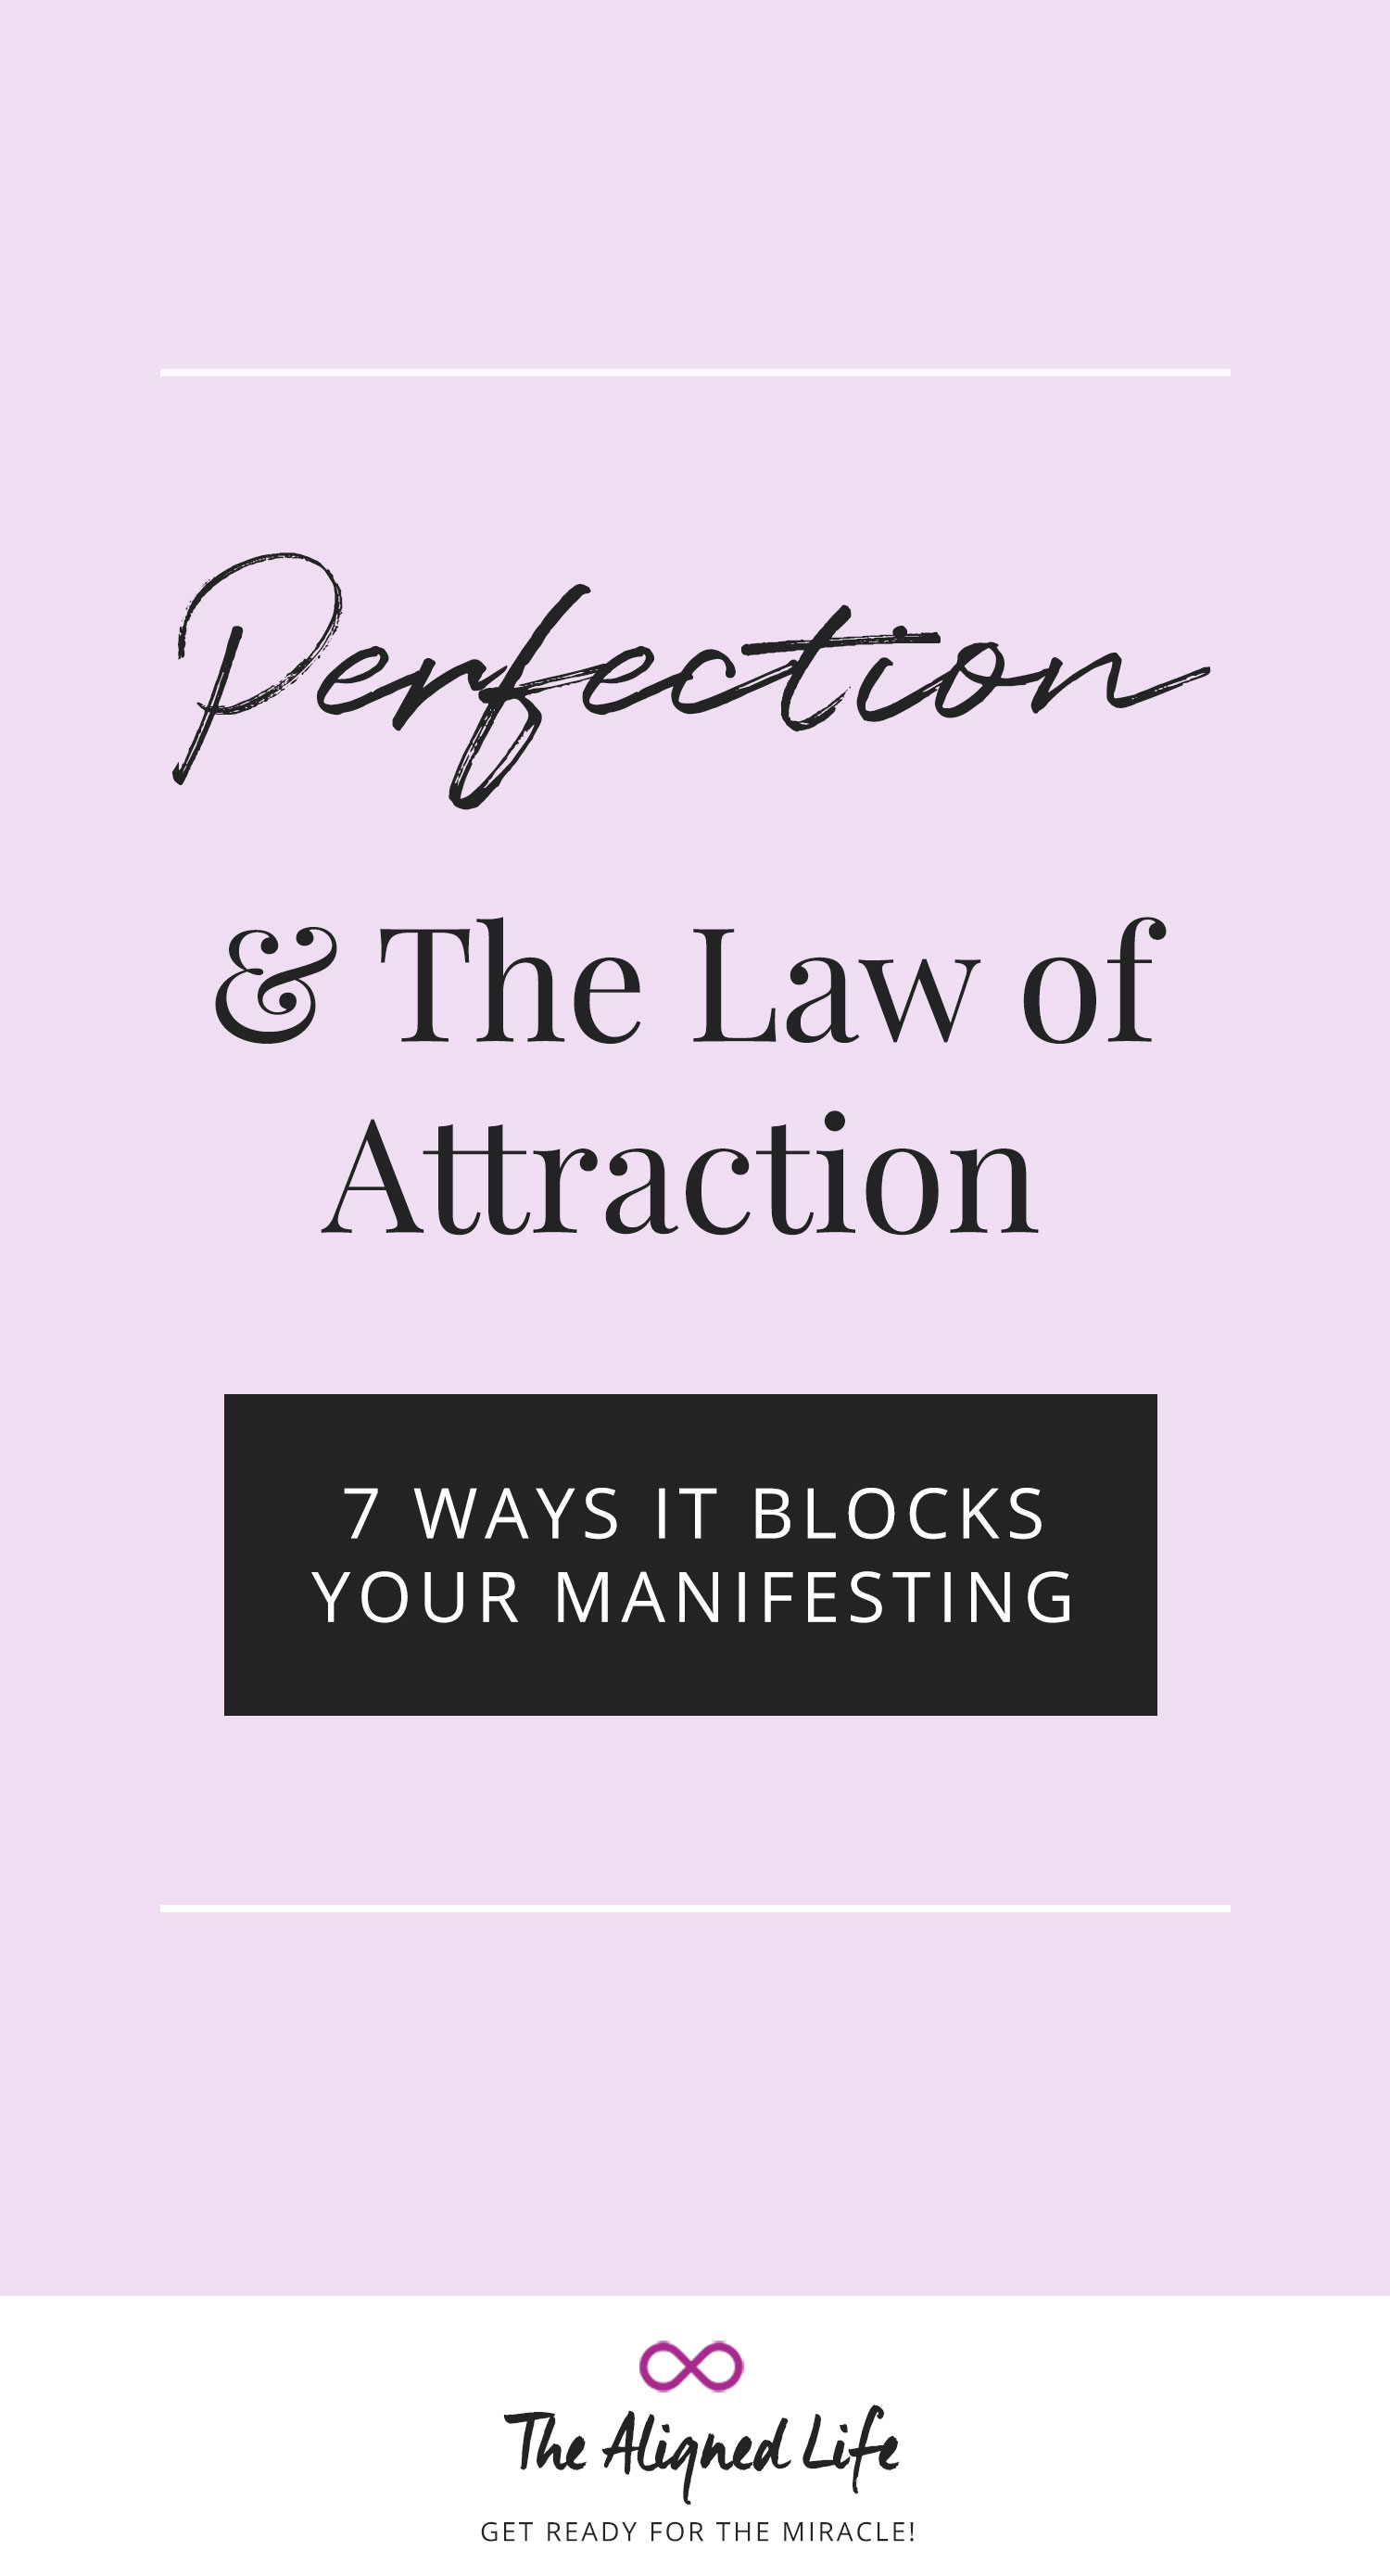 Perfection & The Law of Attraction: 7 Ways It Blocks Your Manifesting